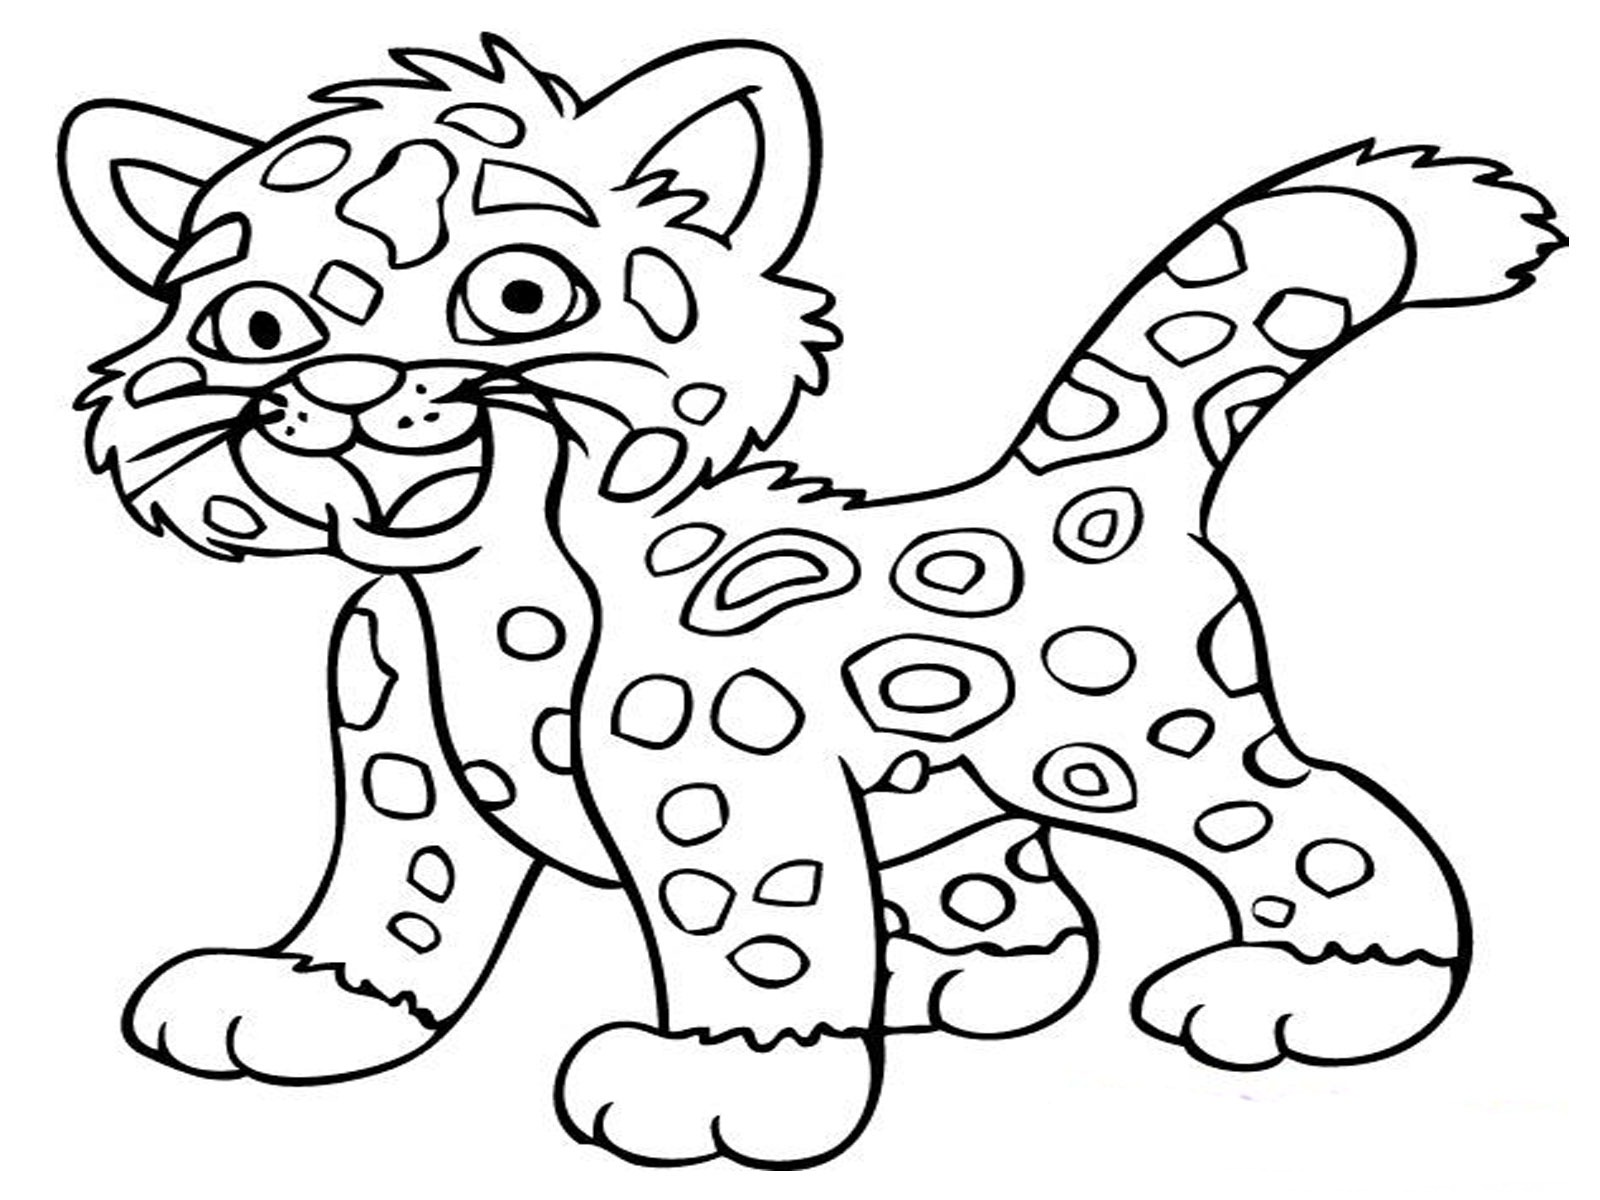 jaguar-animal-coloring-pages-realistic-coloring-pages